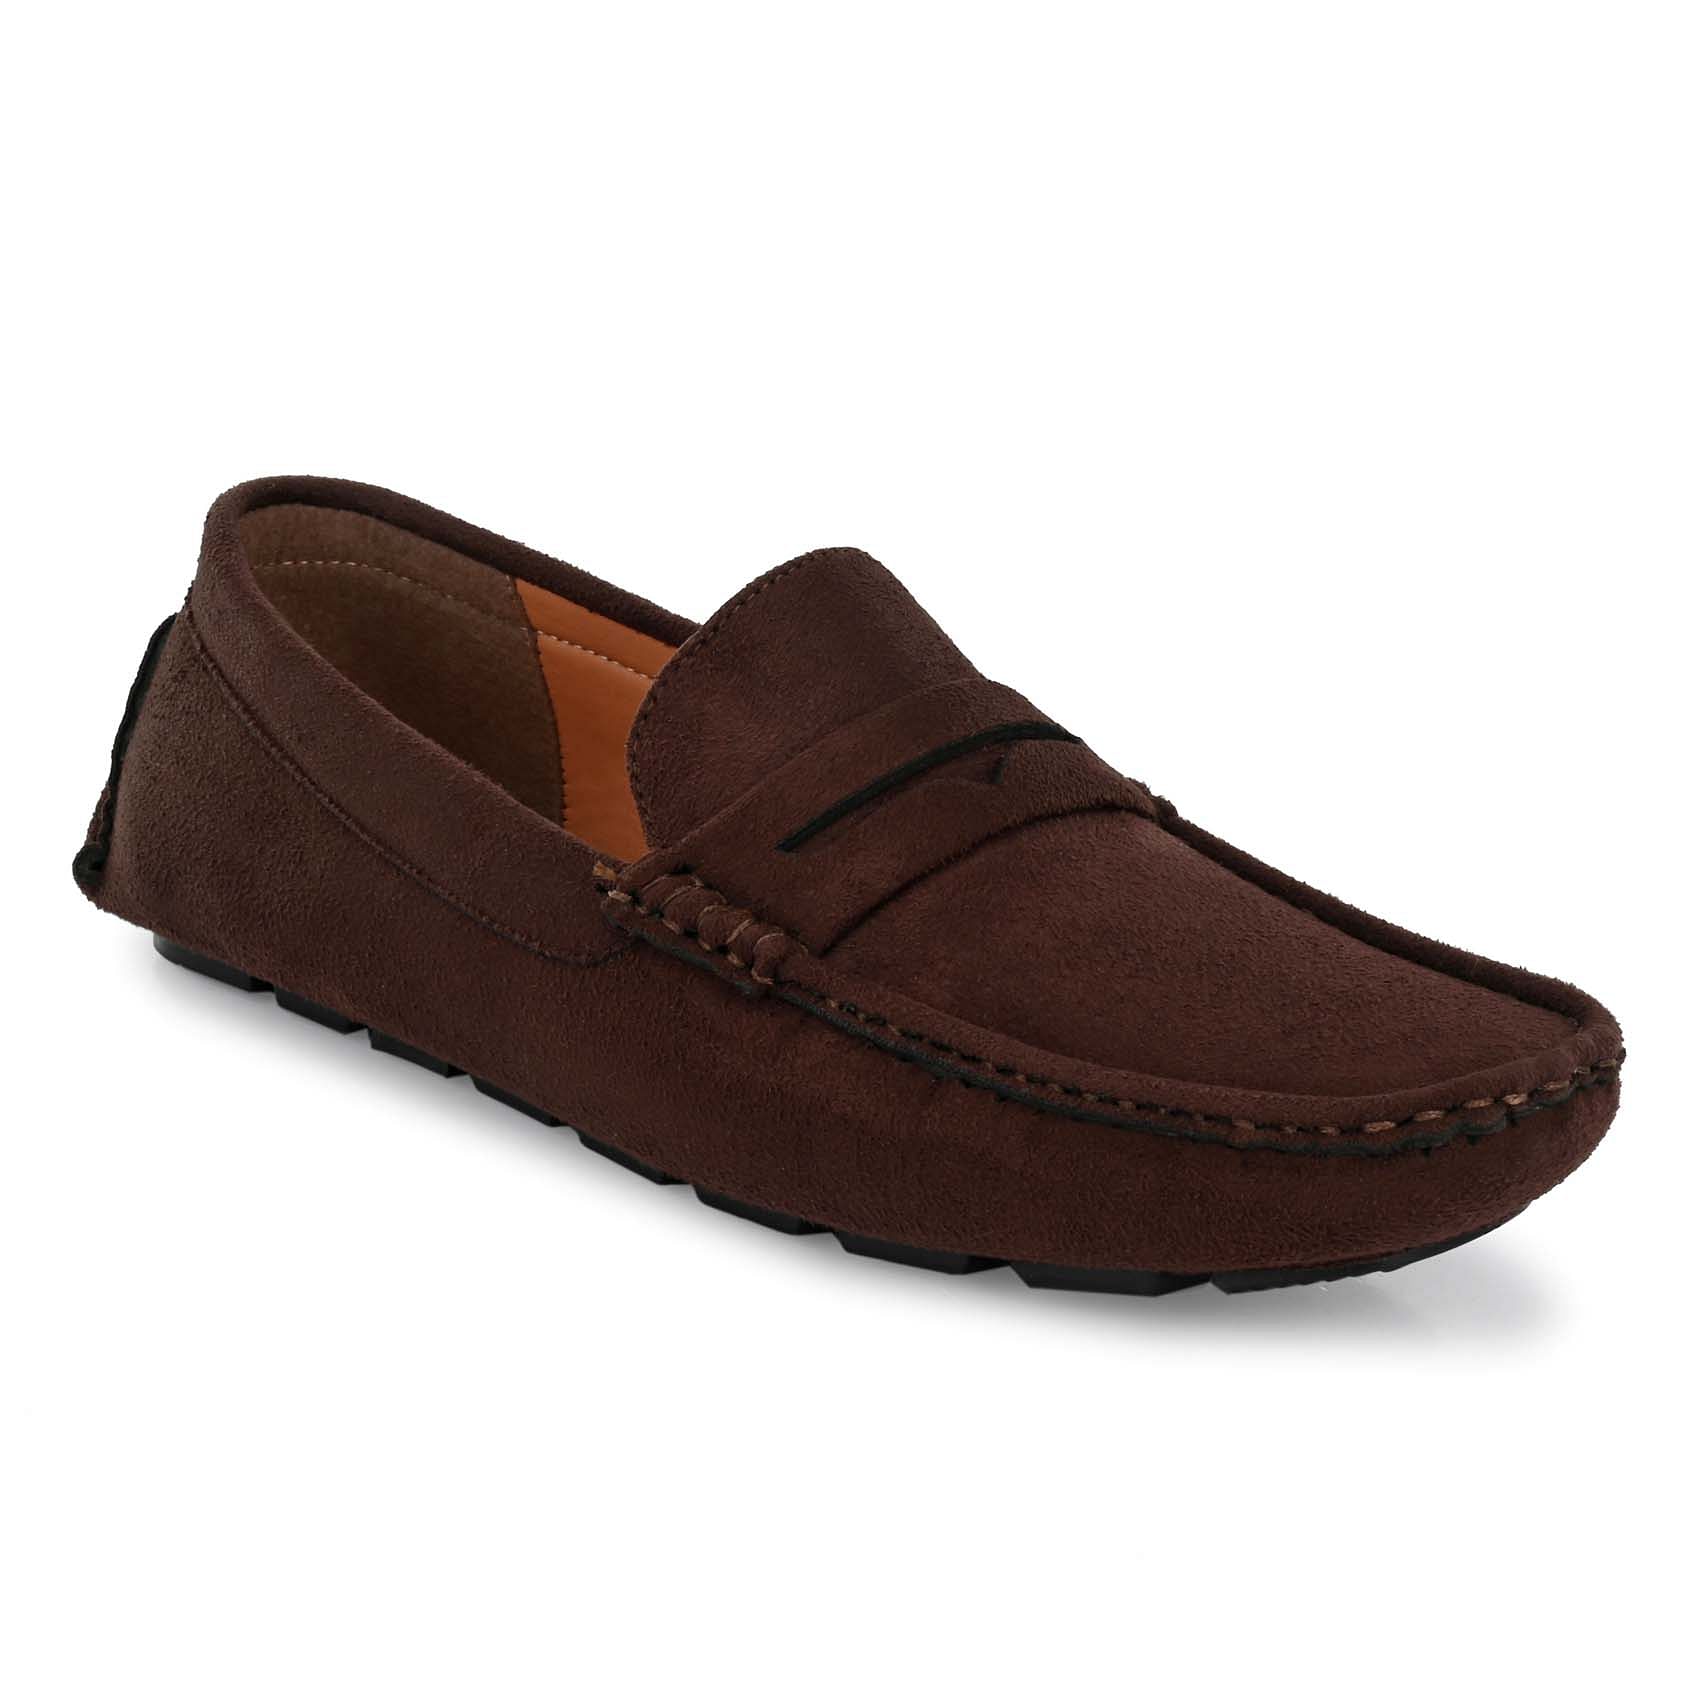 Pair-it Men's Loafers Shoes - Brown-LZ-Loafer107